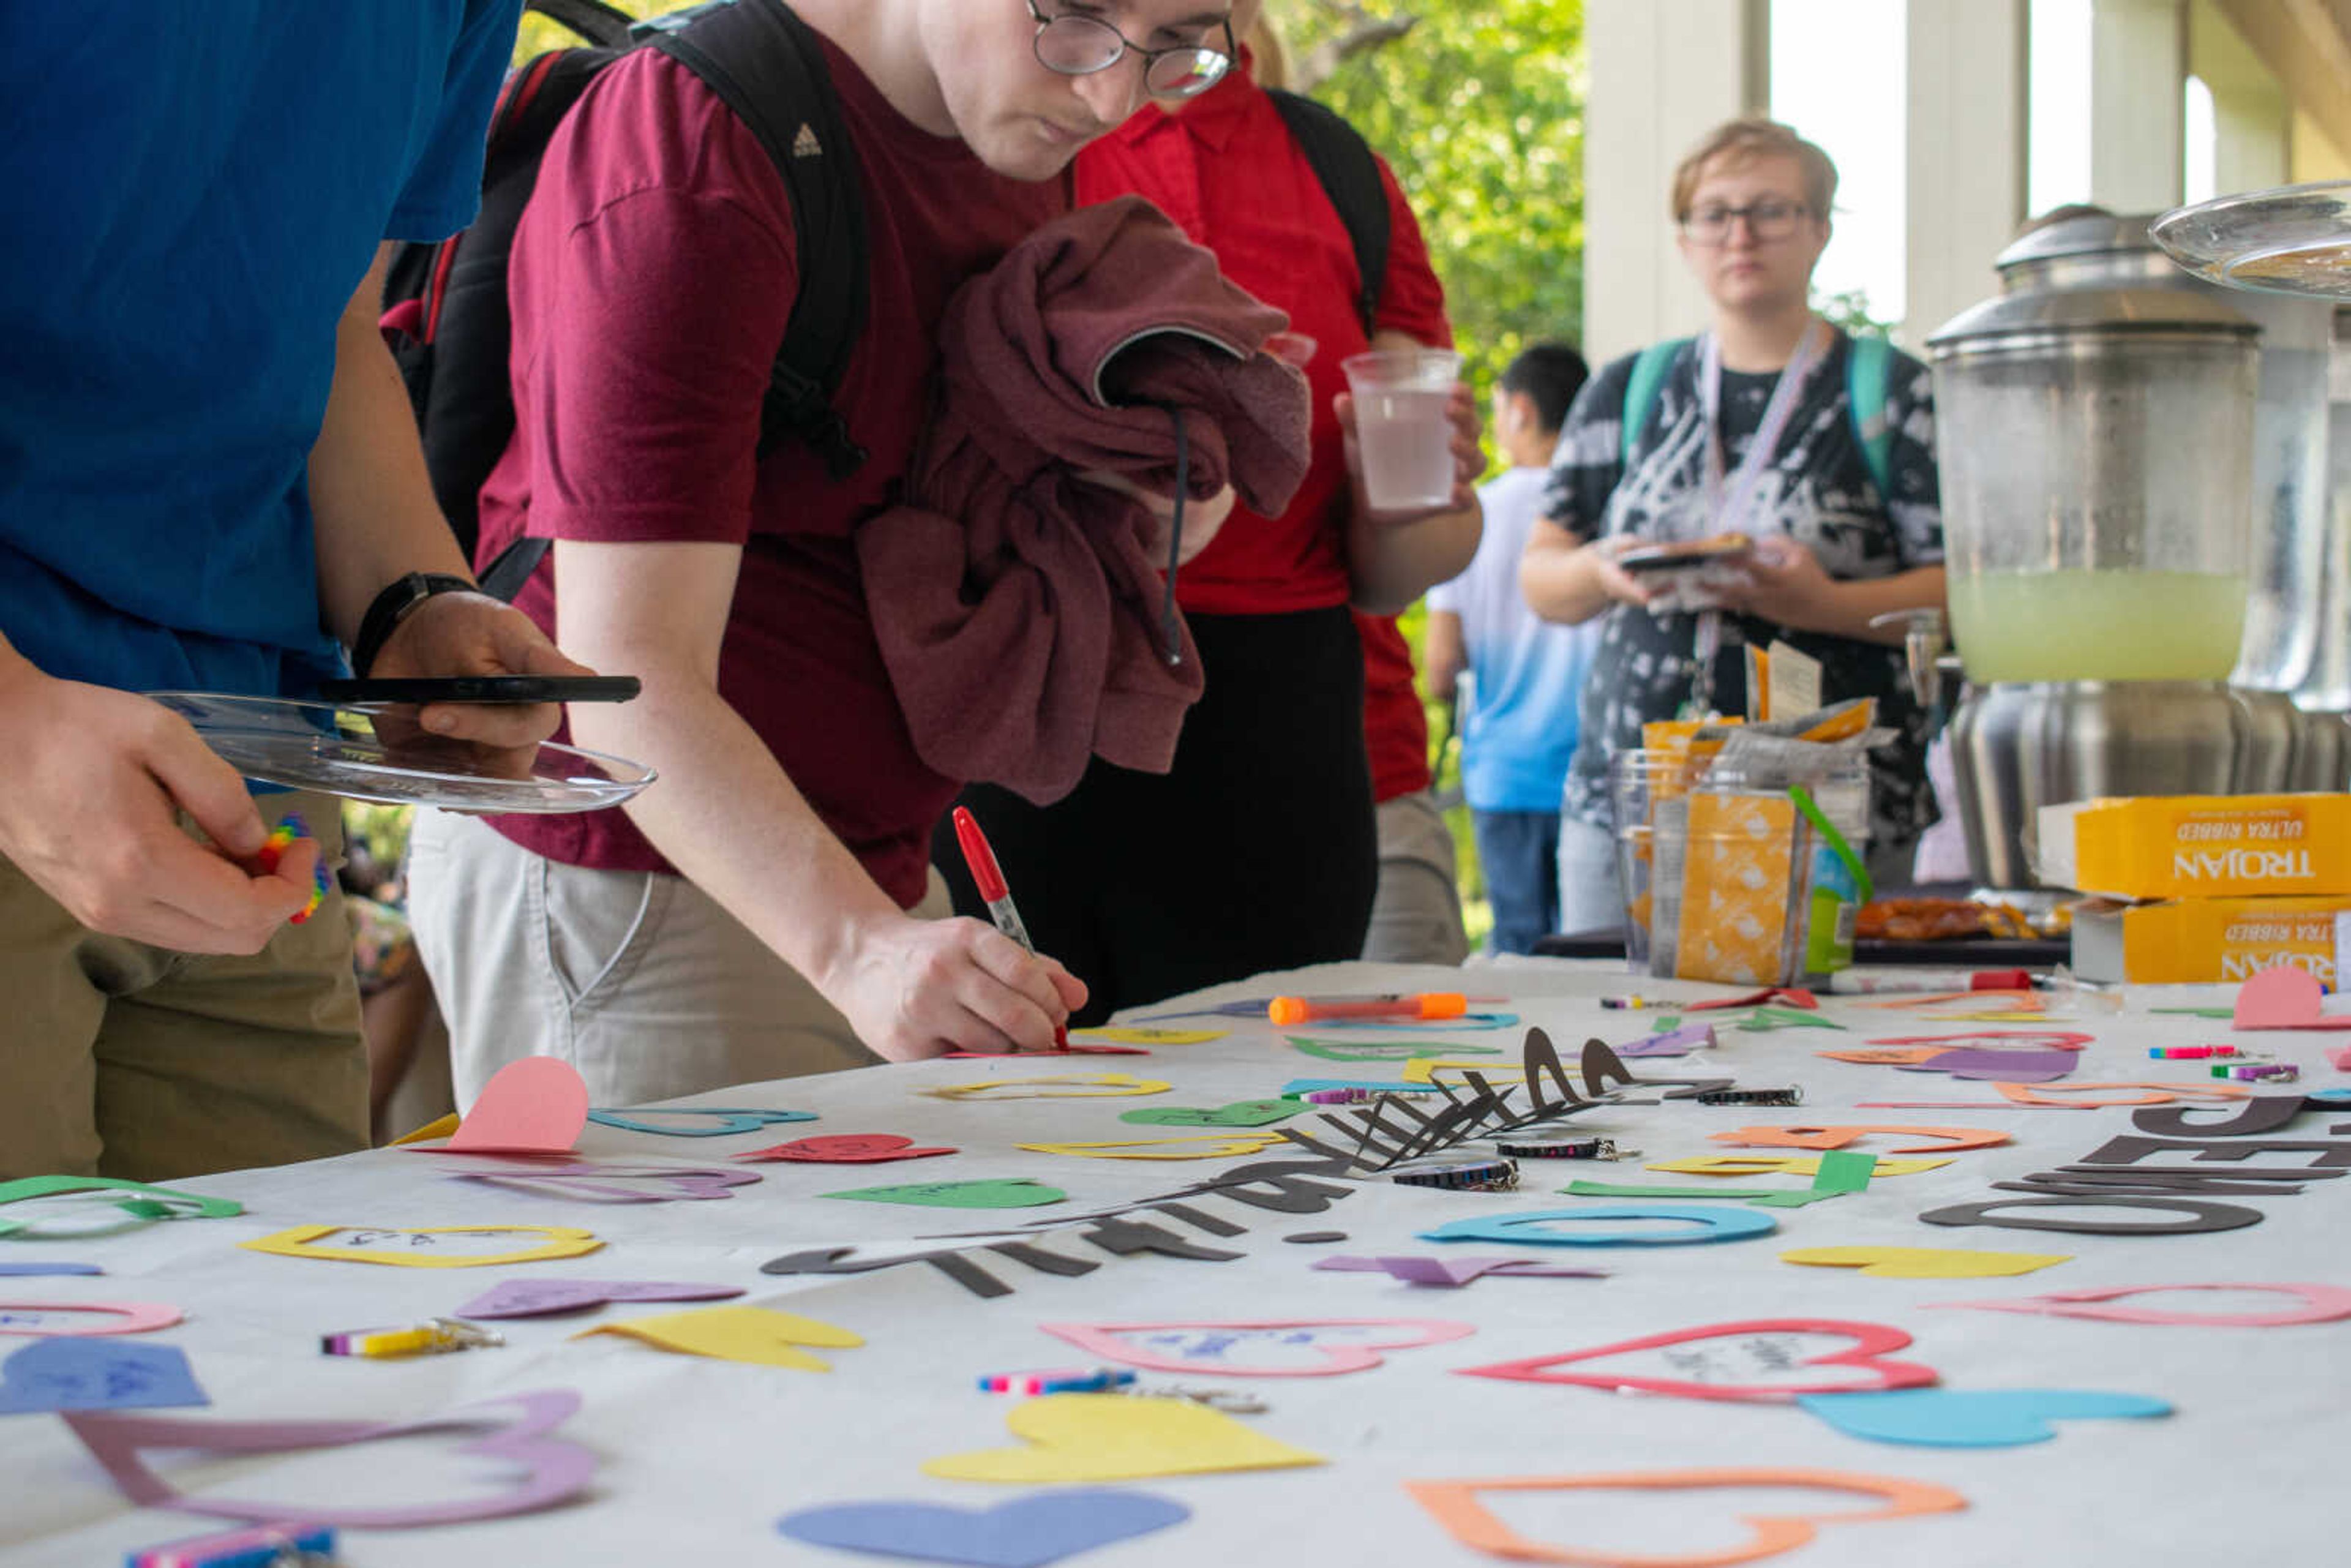 Picnic participants write down their names on the banner and taking a key chain provided by the organization outside of Kent Library on Wednesday, Aug. 21.